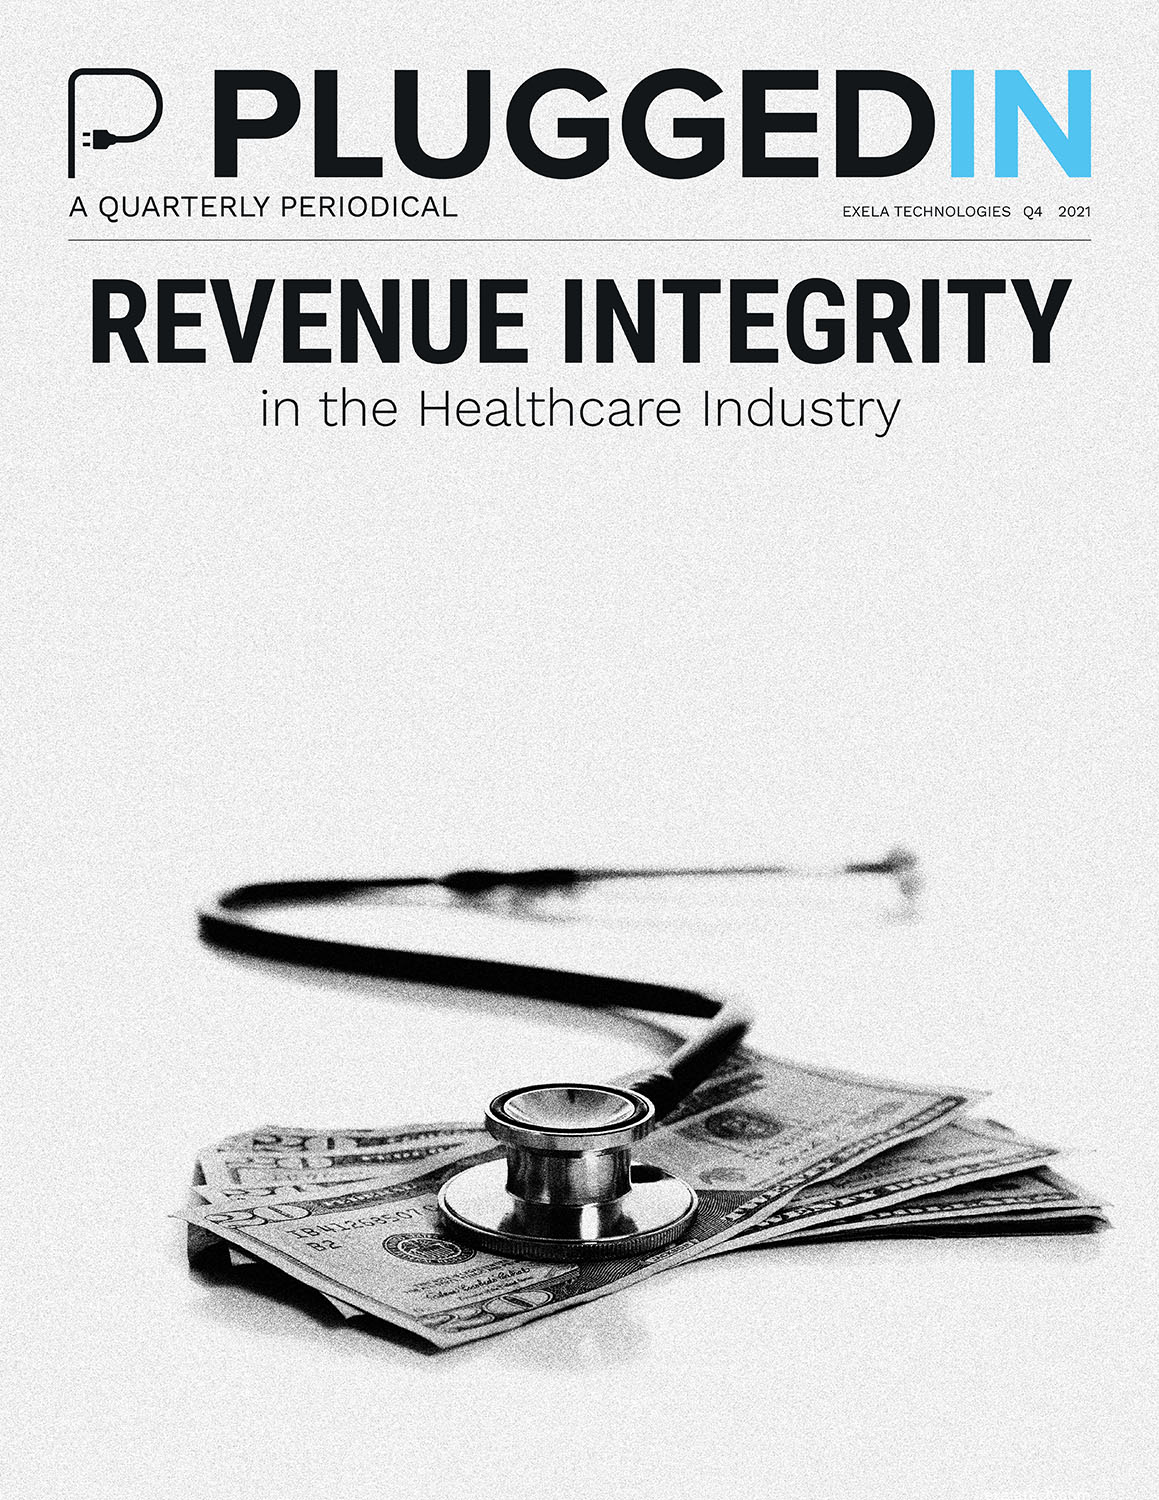 Revenue Integrity in the Healthcare Industry